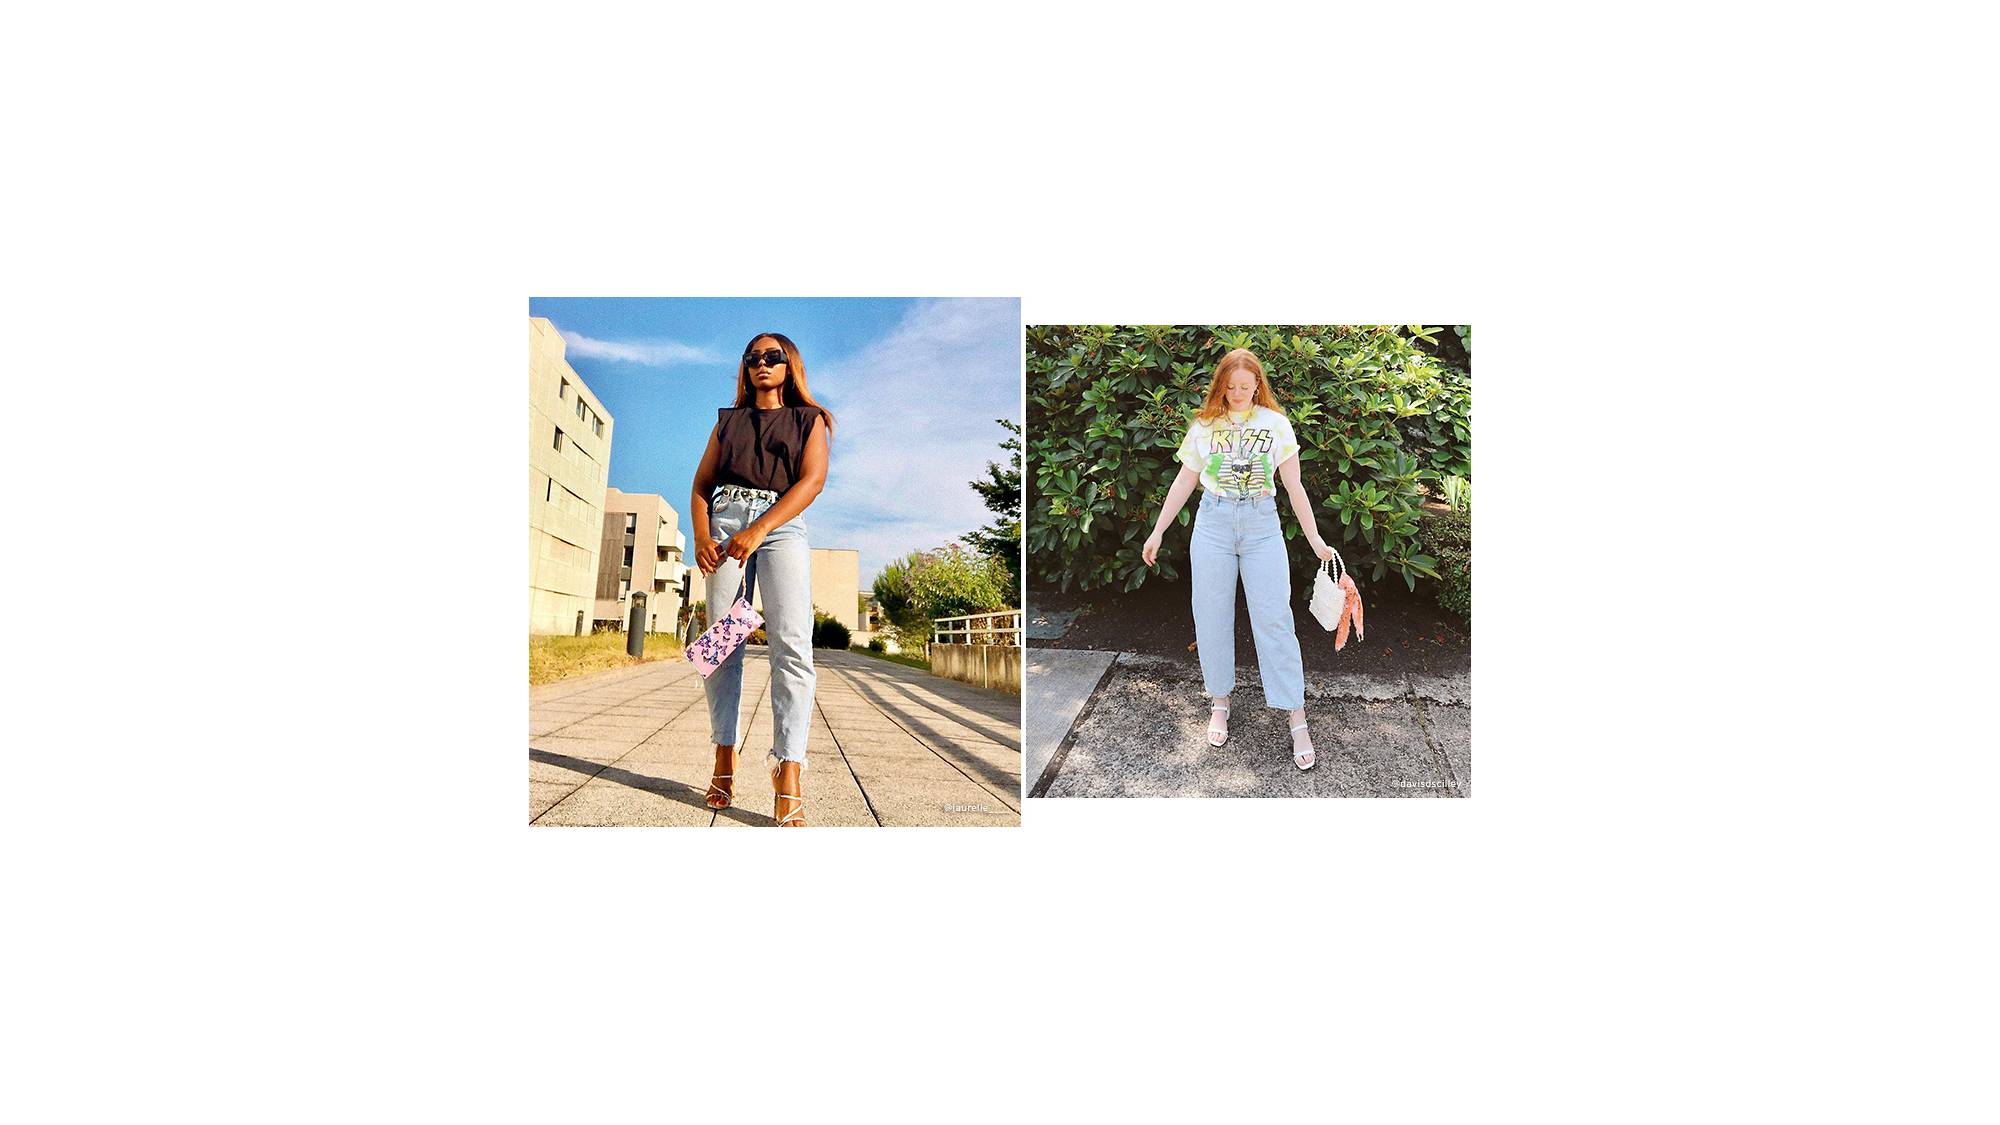 SPRING JEANS OUTFIT IDEAS 👖 denim outfits 2 ways - work wear